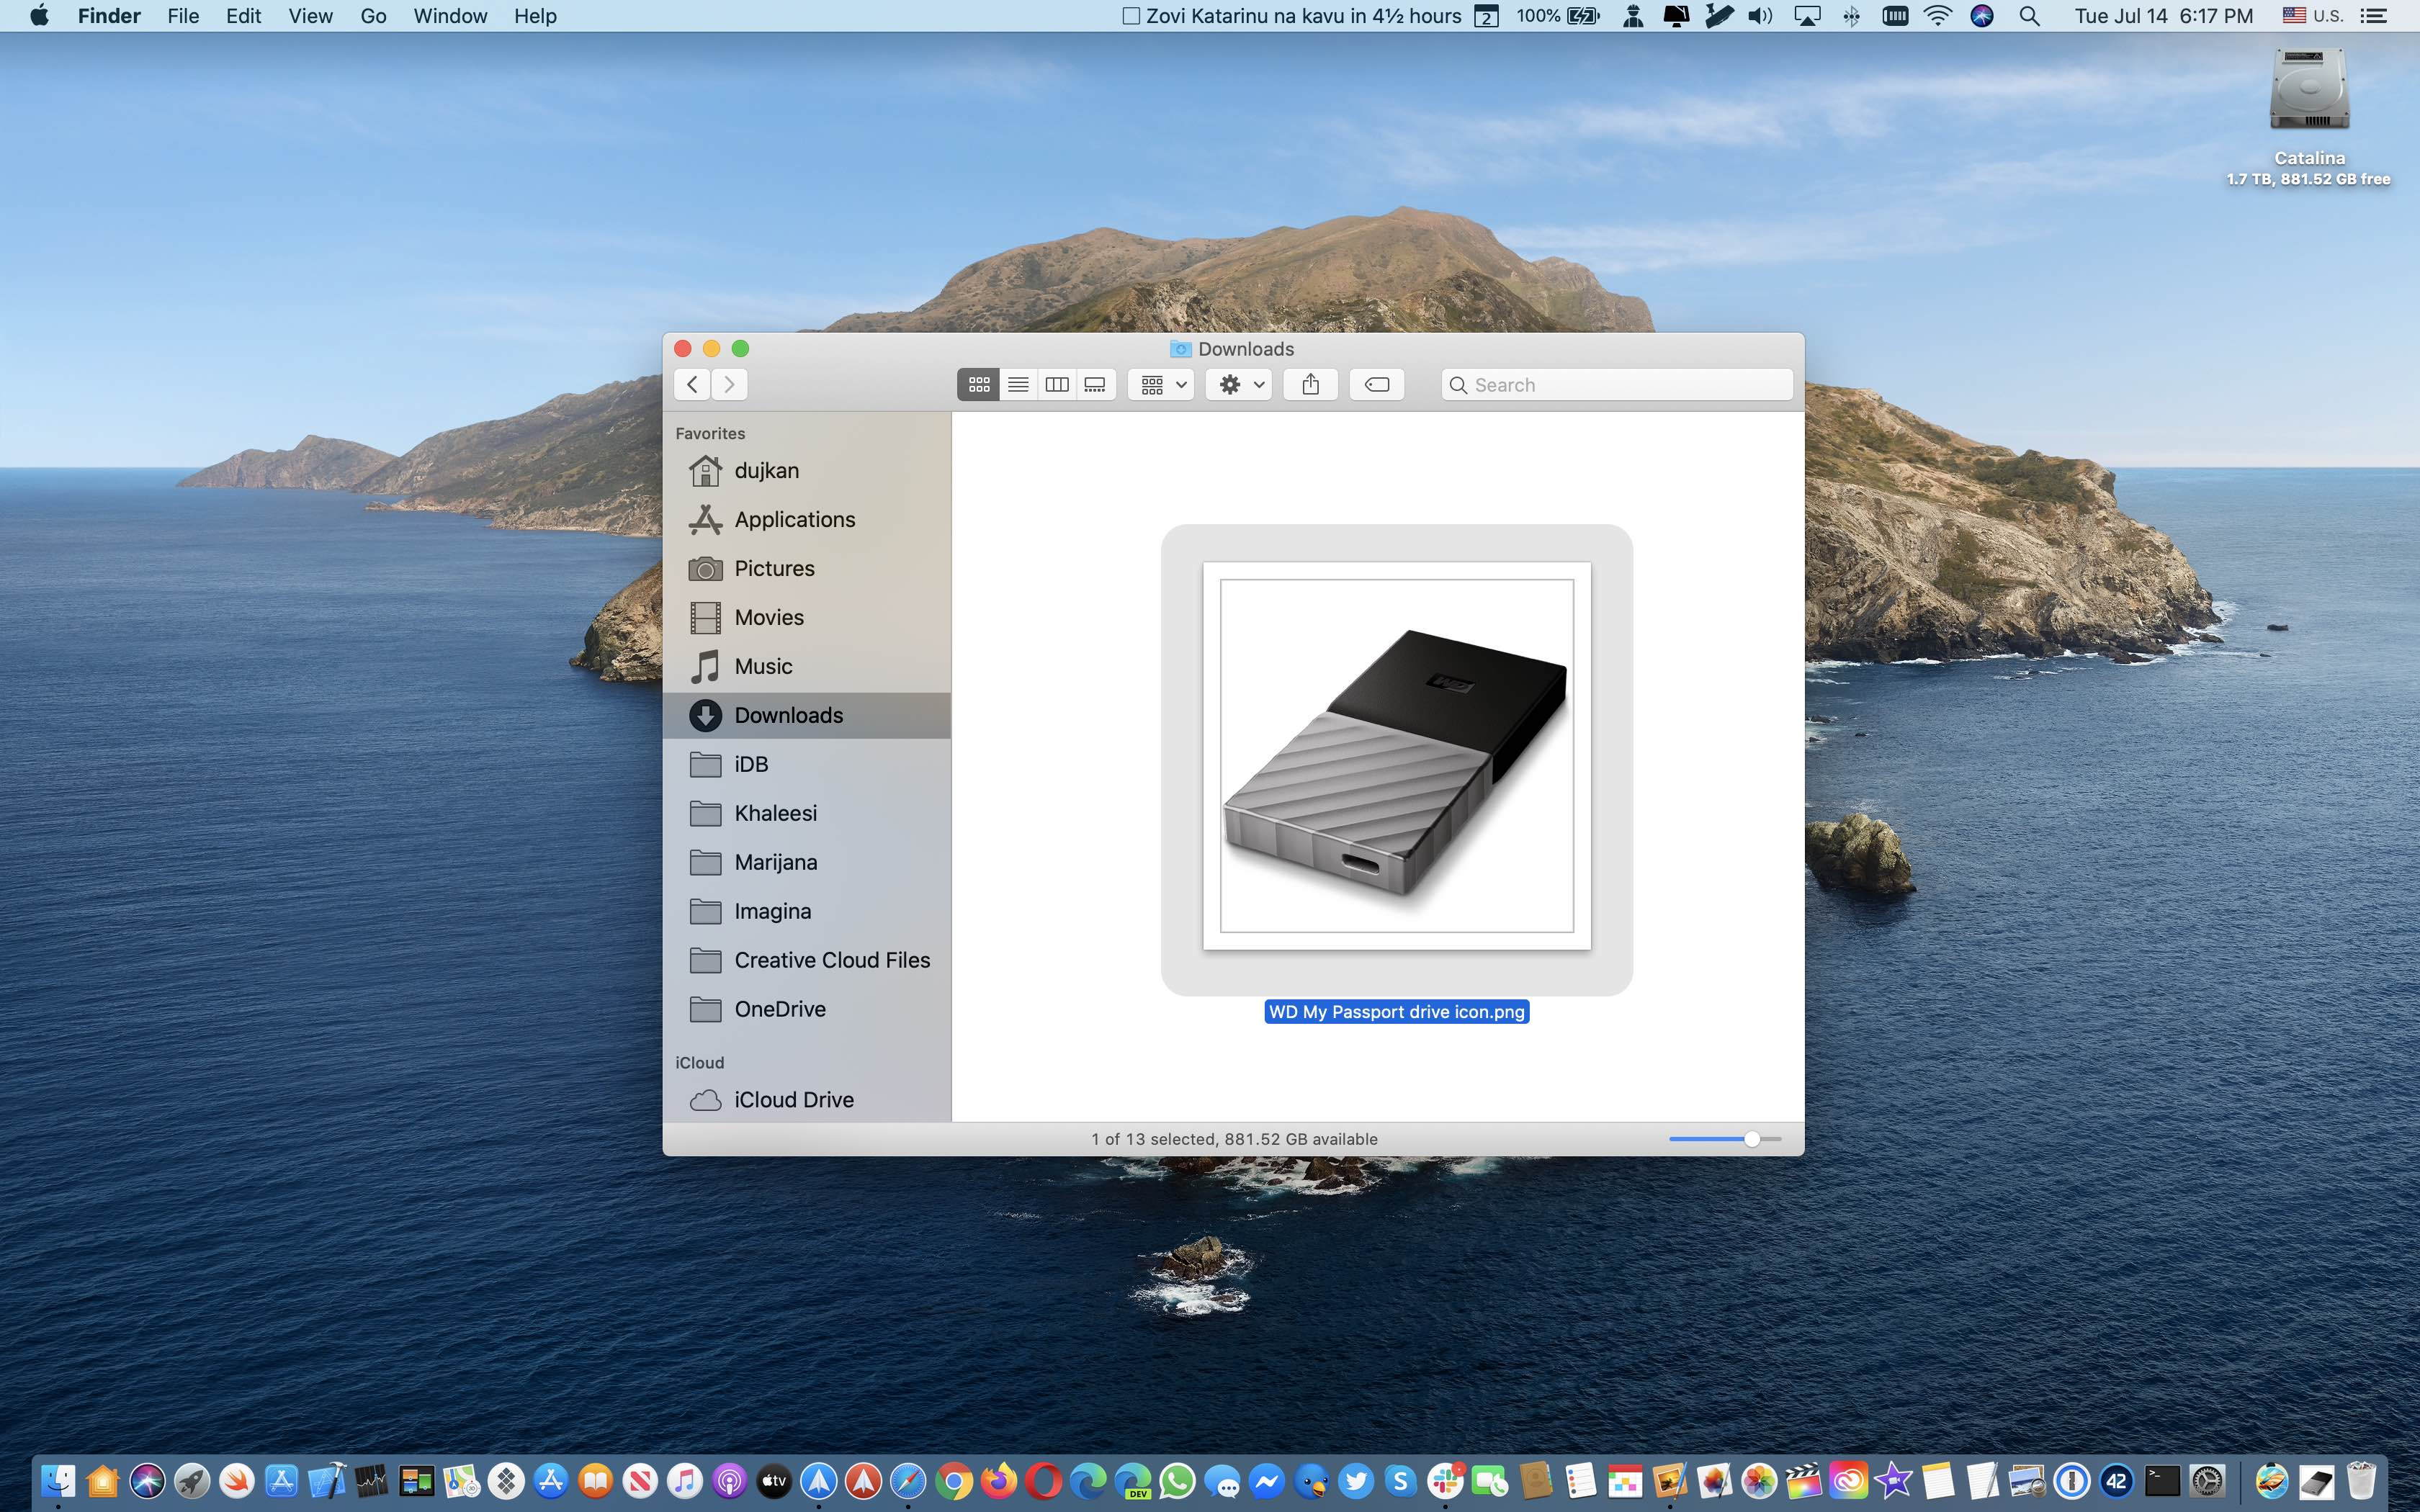 How To Customize Mac Drive Icons For Connected Storage Devices